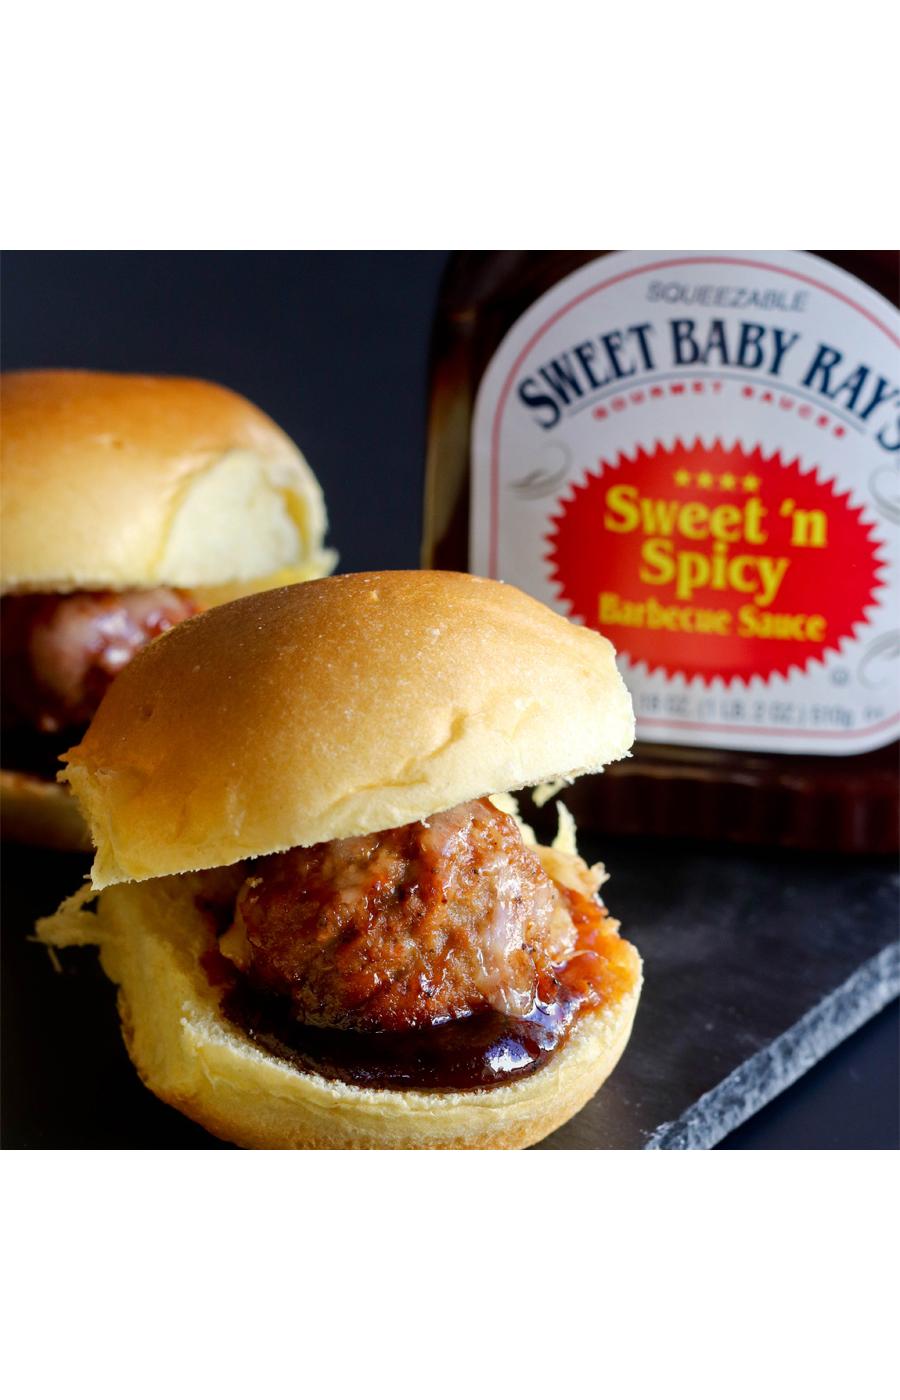 Sweet Baby Ray's Sweet 'n Spicy Barbecue Sauce; image 3 of 4